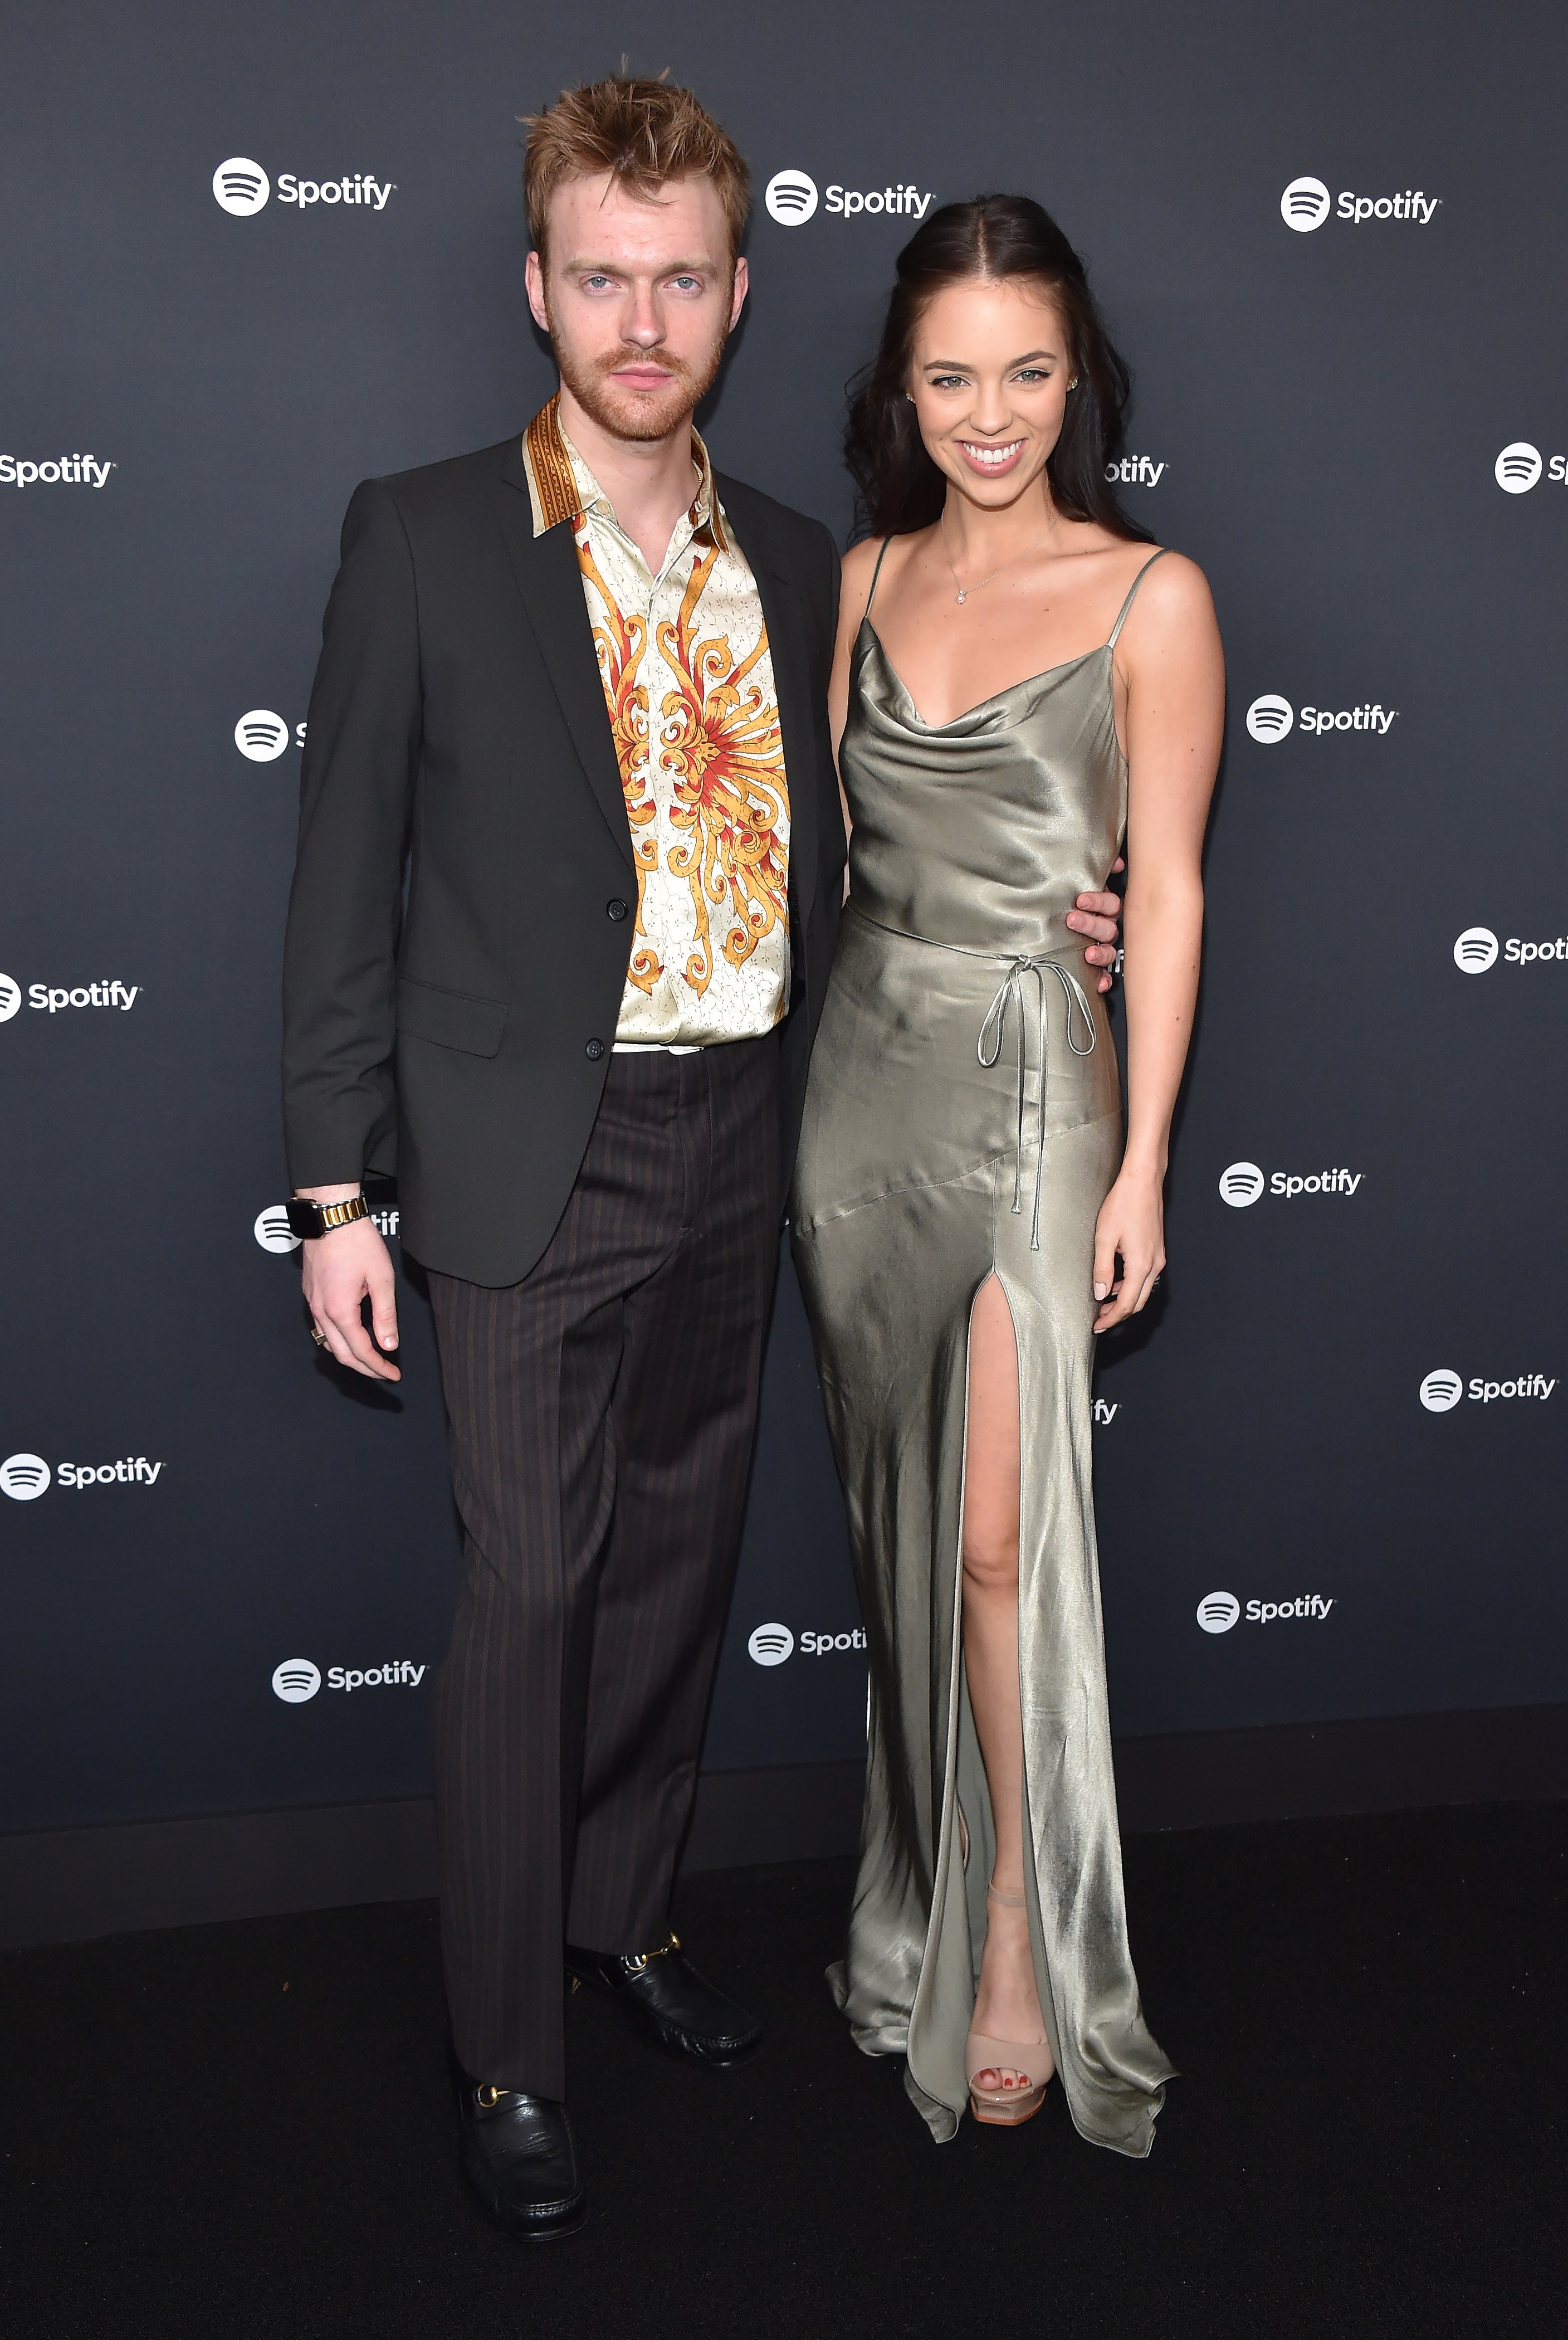 Finneas O'Connell and Claudia Sulewski at the Spotify Best New Artist Party on January 23, 2020 in Los Angeles. | Source: Shutterstock 